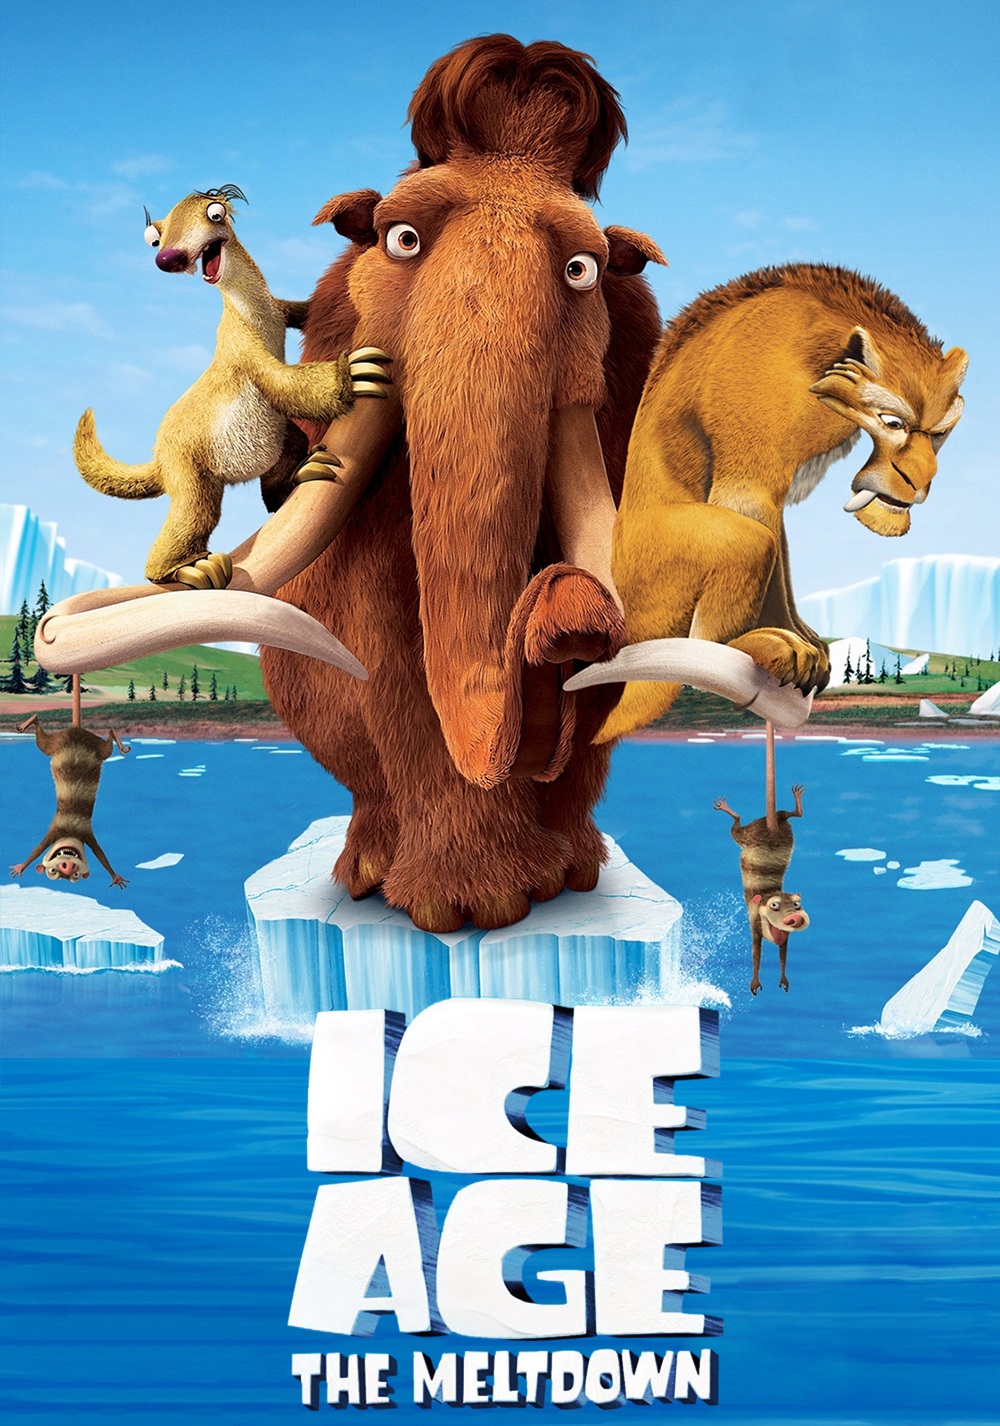 Ice Age: The Meltdown wallpaper, Movie, HQ Ice Age: The Meltdown pictureK Wallpaper 2019